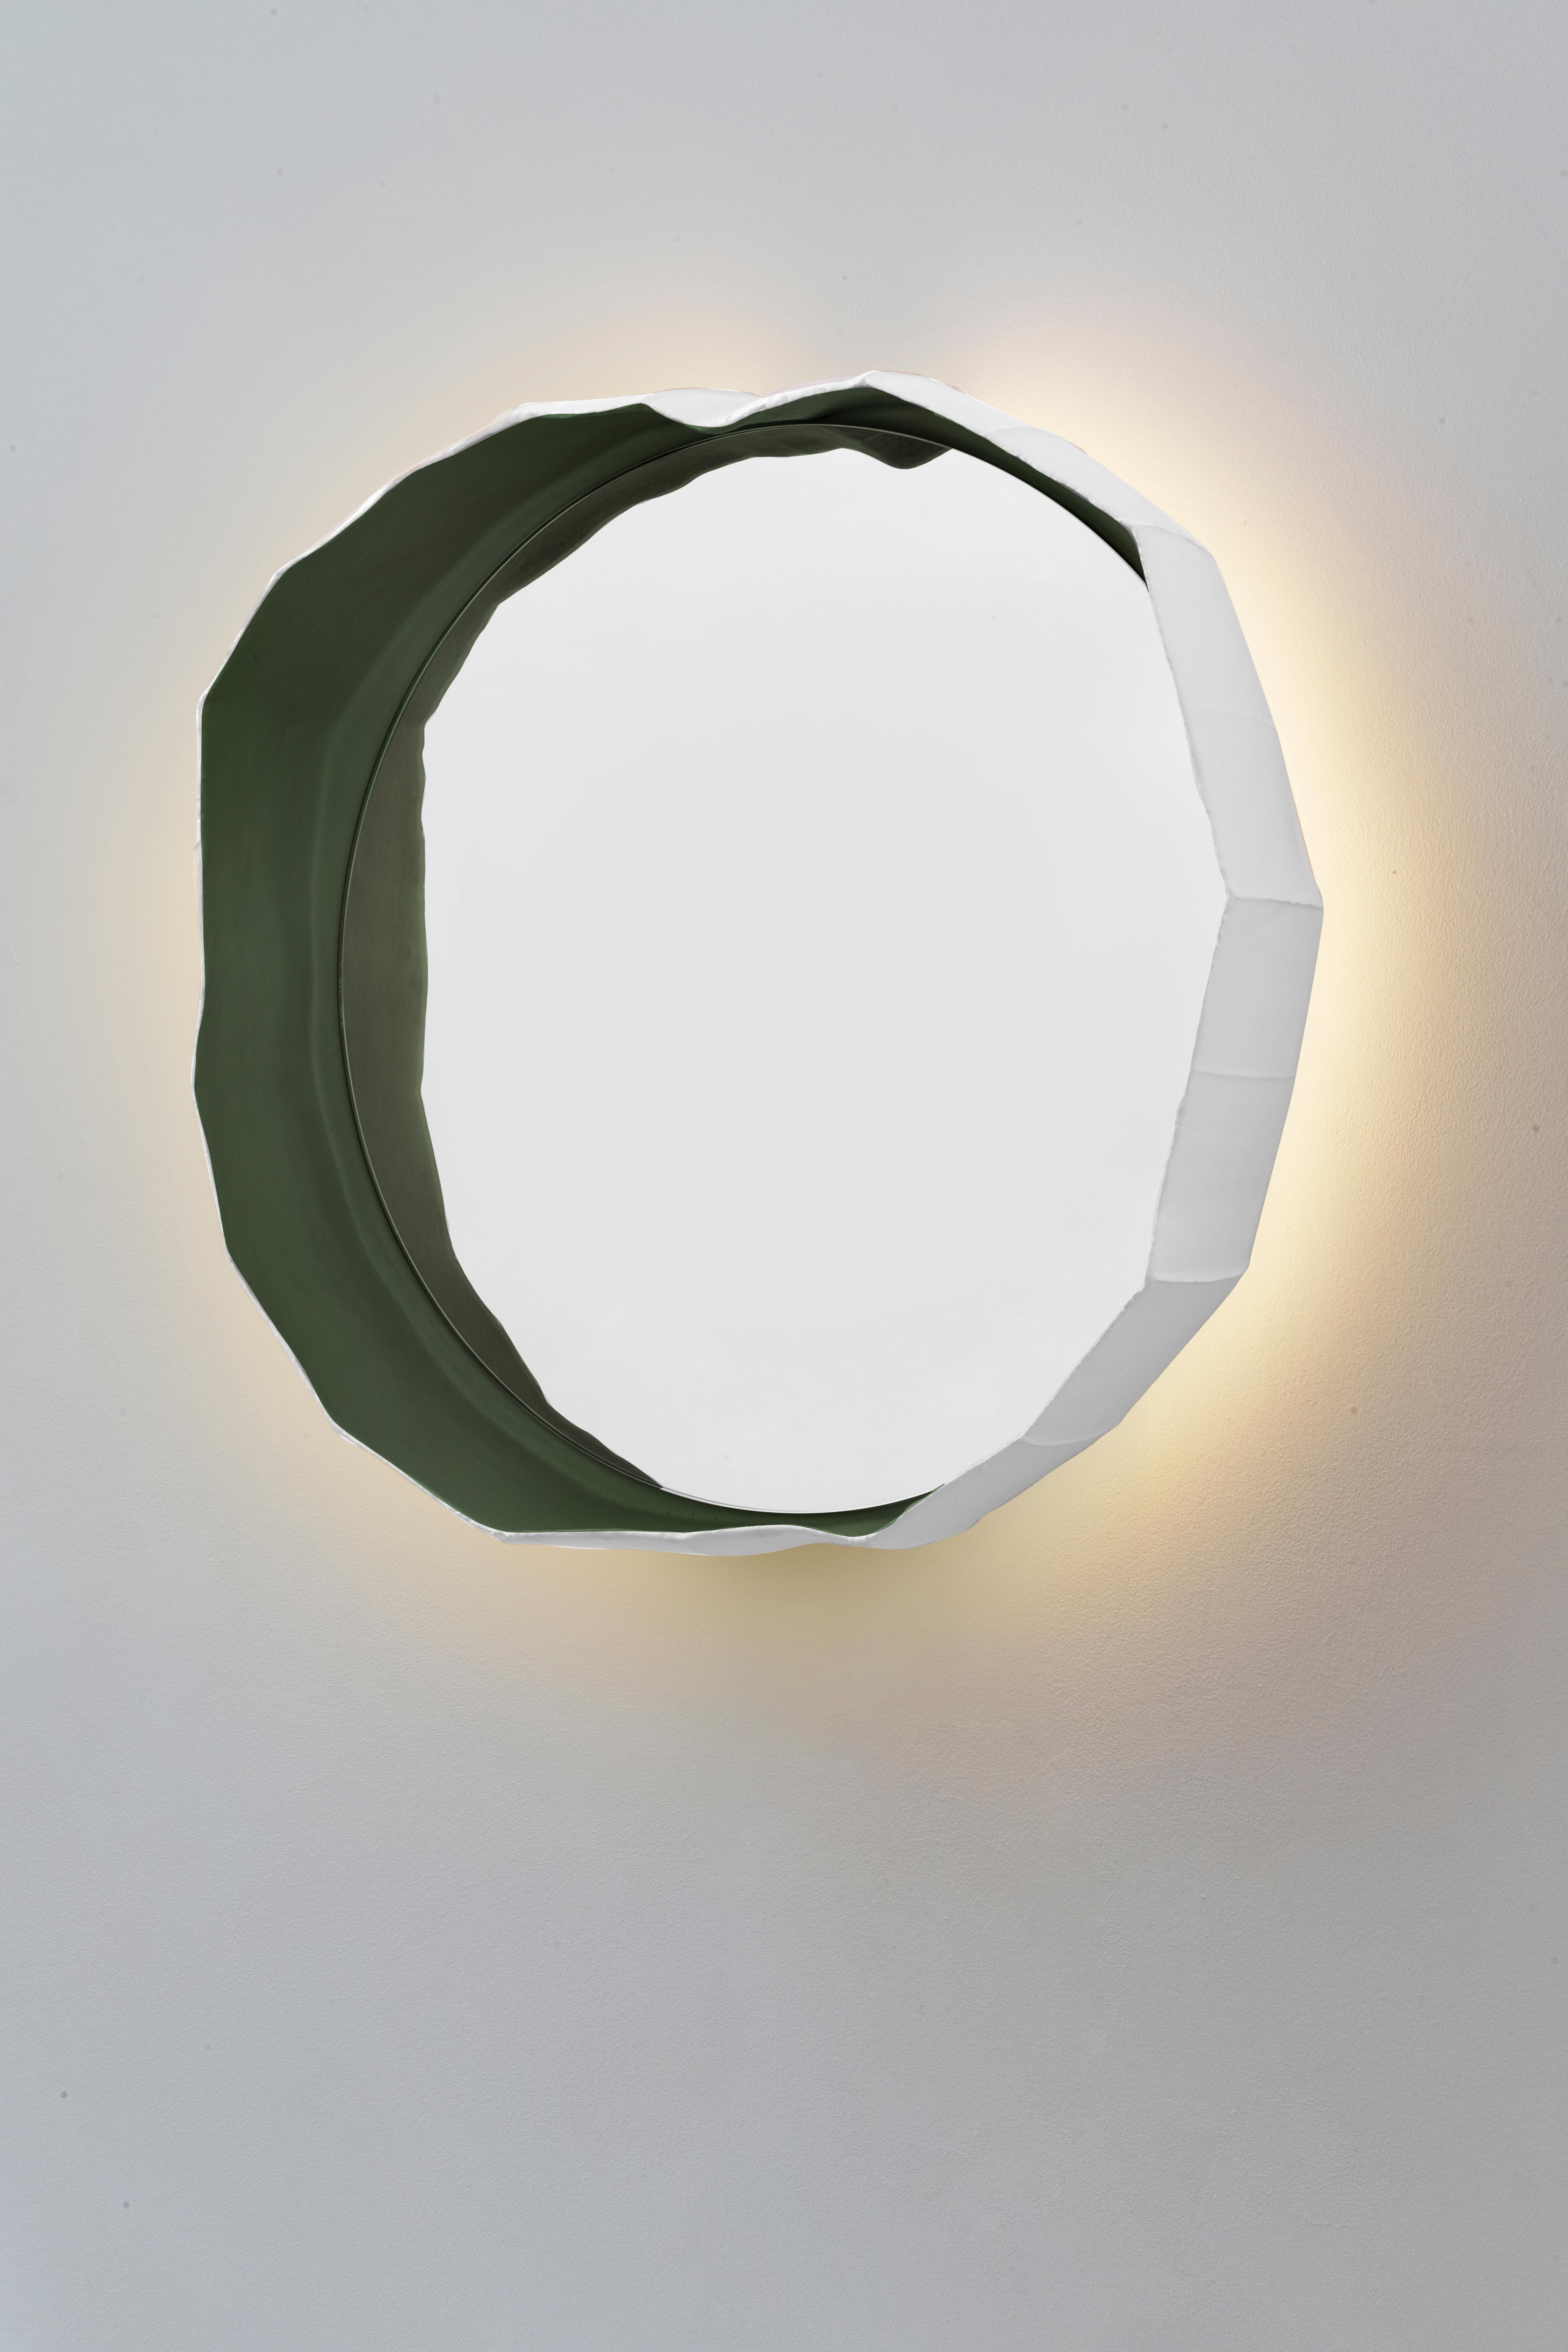 Handmade in Italy by Paola Paronetto & Giovanni Botticelli, this mirror merges ceramic with glass. REFLECTIONS, a fusion of distinctive materials developed by their creators, unites an apparently light material such as paper clay with the crisp